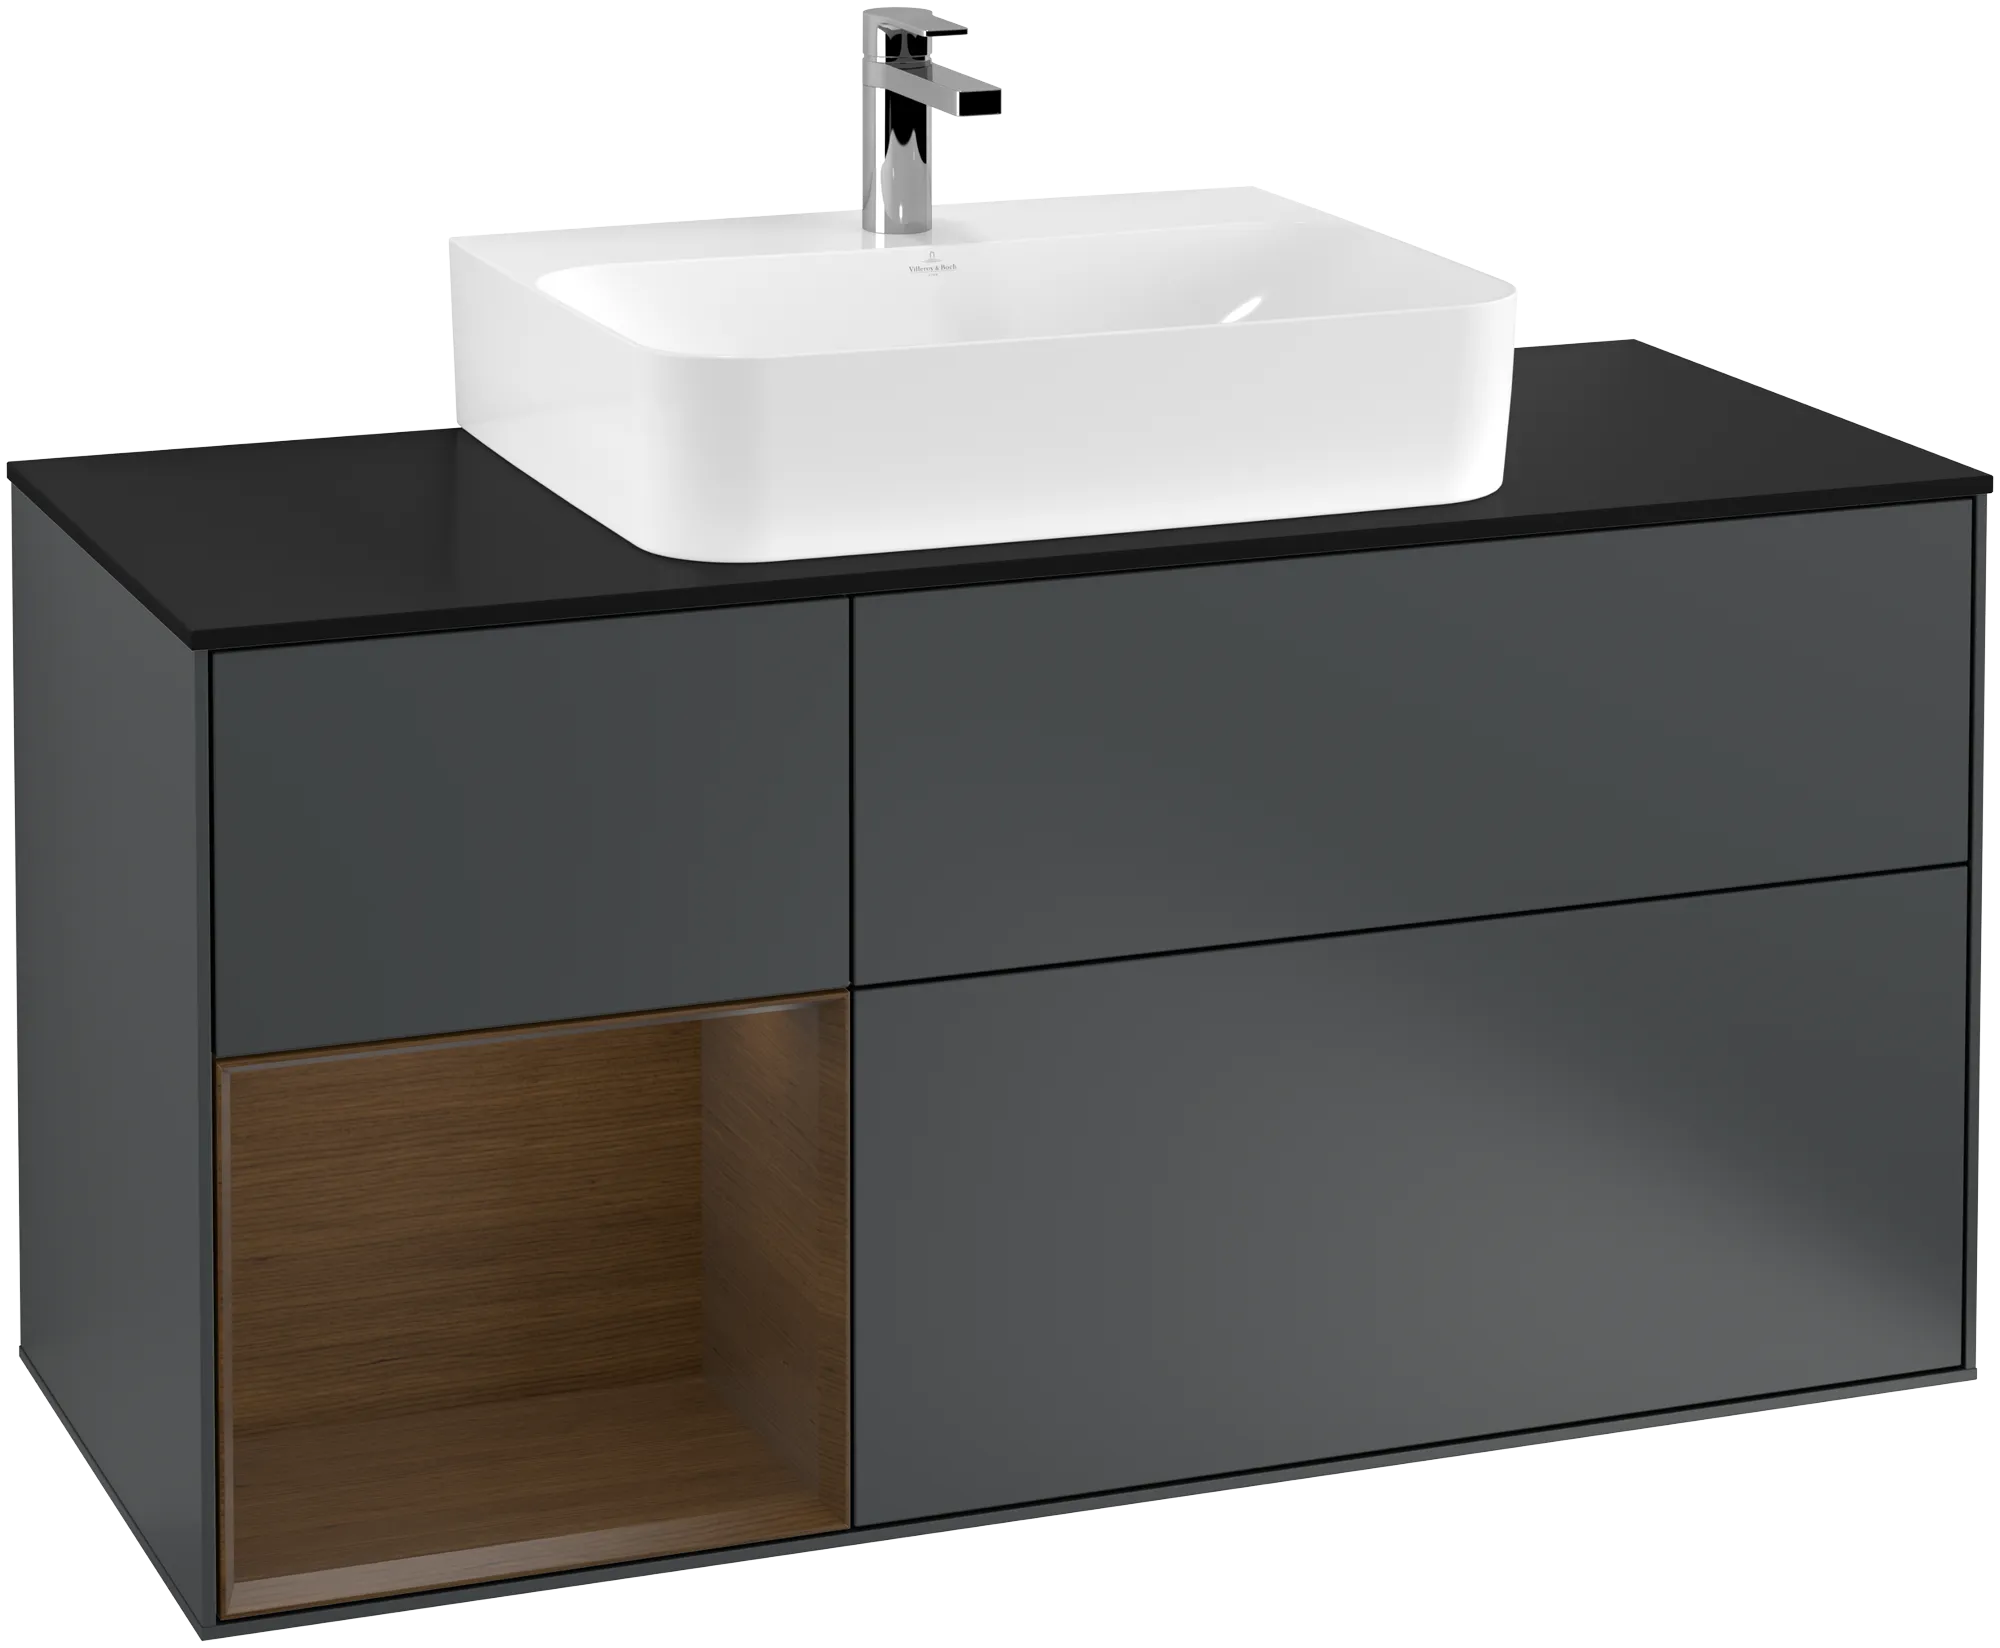 Picture of VILLEROY BOCH Finion Vanity unit, with lighting, 3 pull-out compartments, 1200 x 603 x 501 mm, Midnight Blue Matt Lacquer / Walnut Veneer / Glass Black Matt #G162GNHG